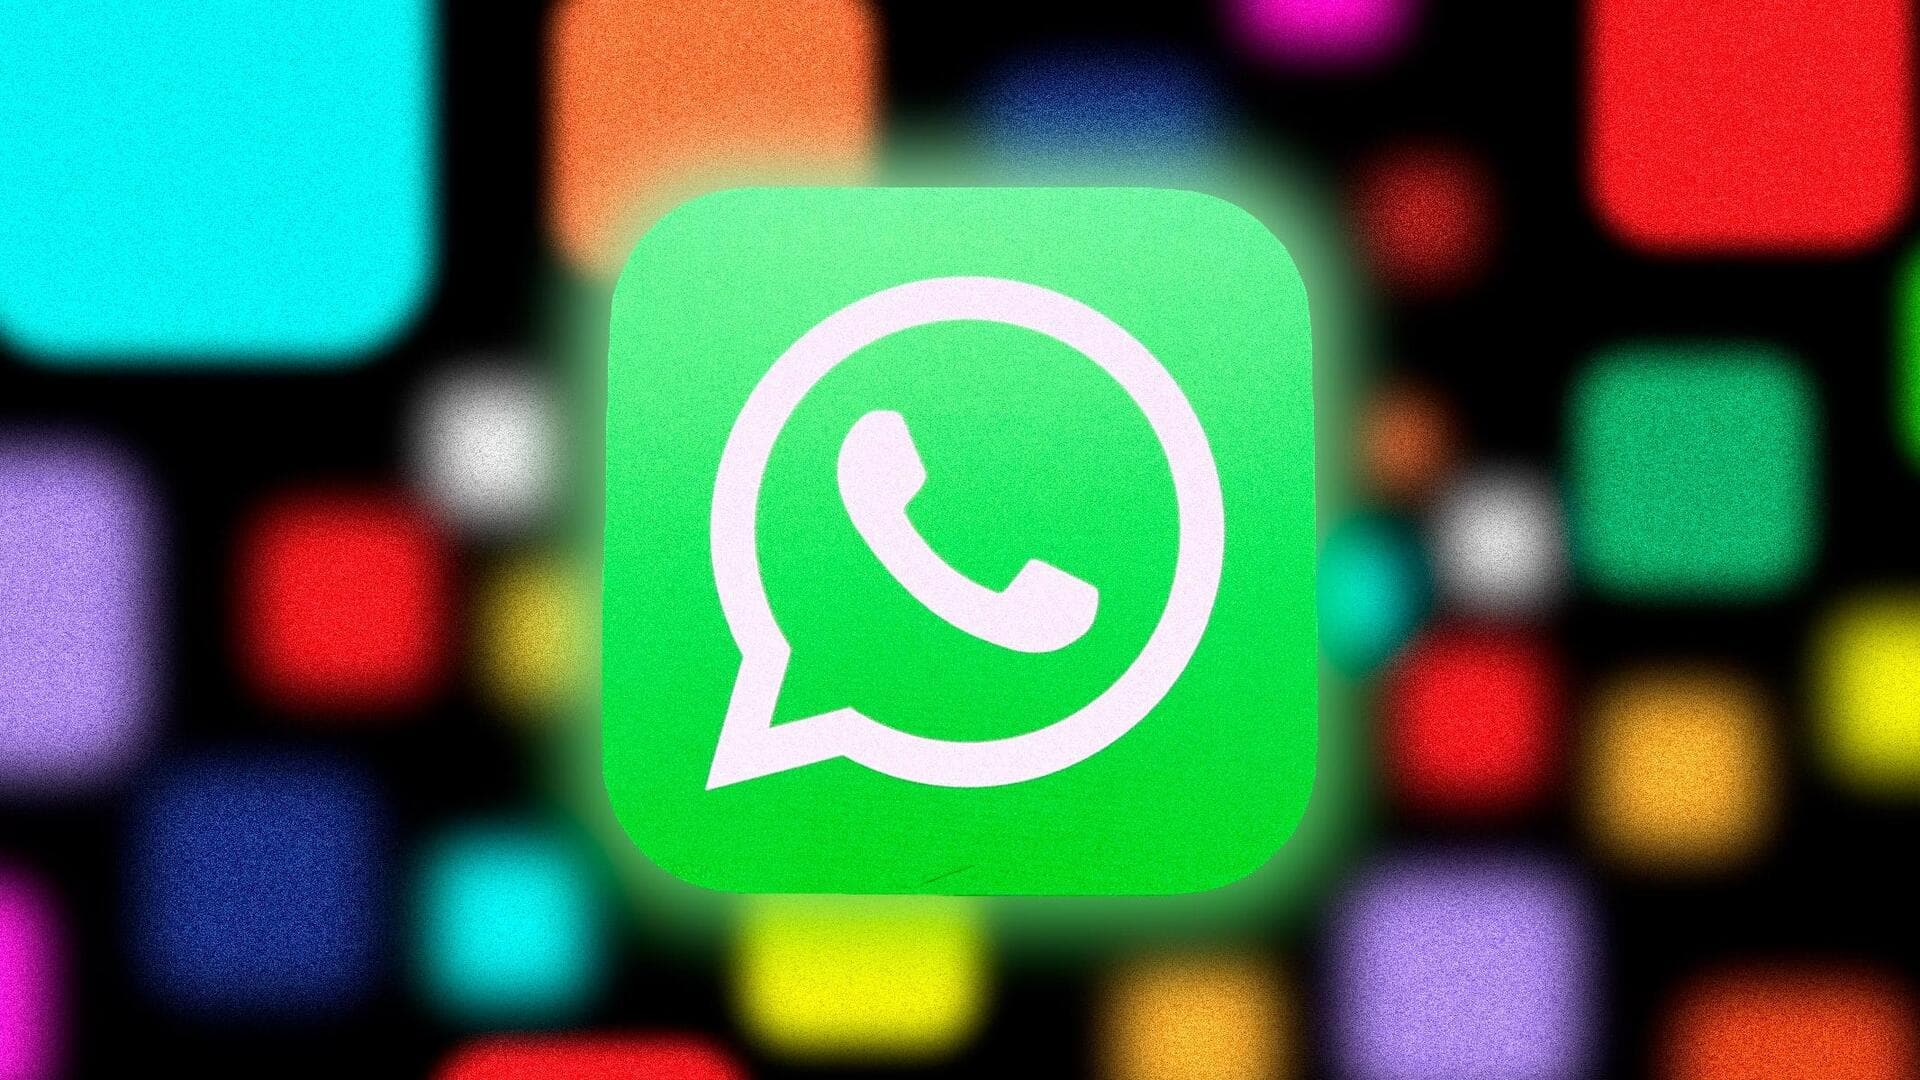 WhatsApp working on feature to scan UPI QR codes